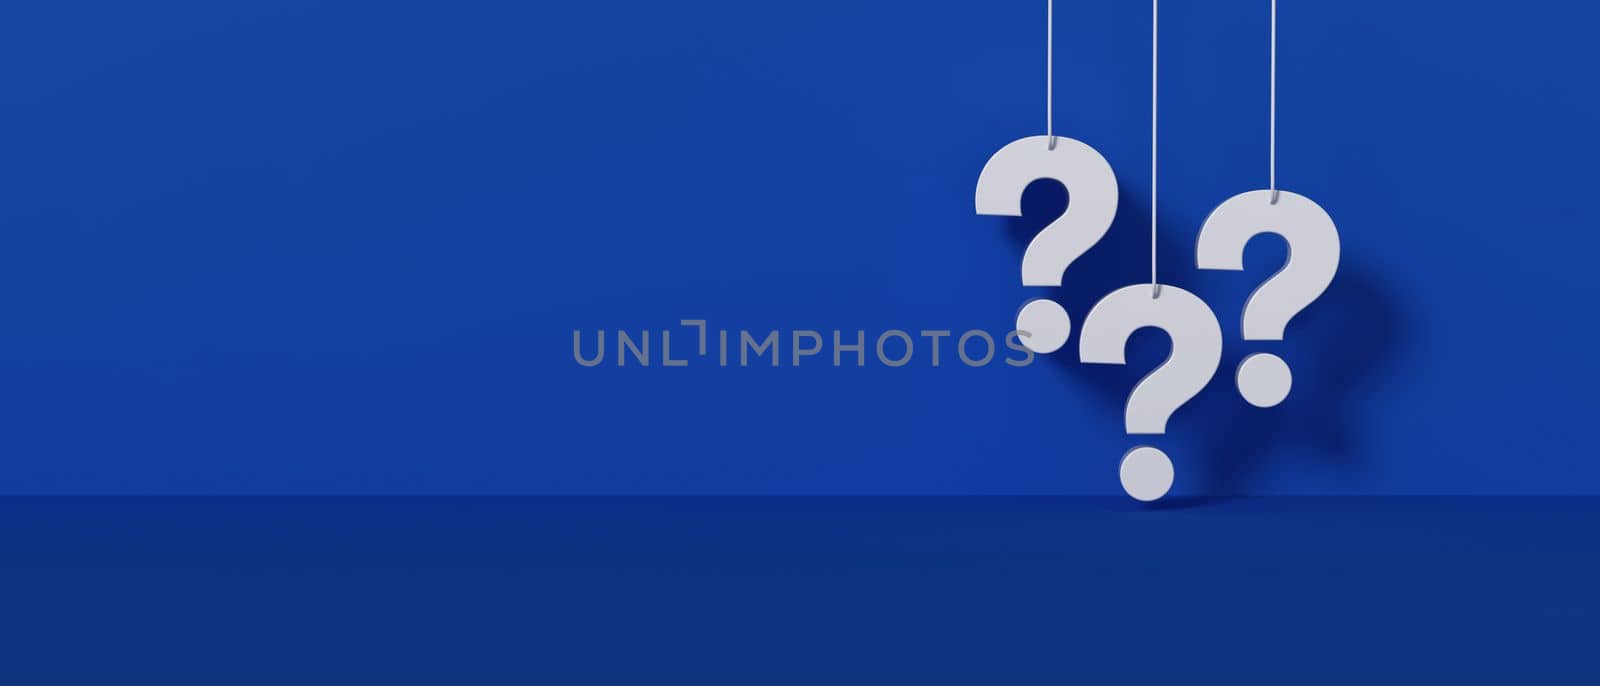 Three white question marks a blue wall background. by ImagesRouges